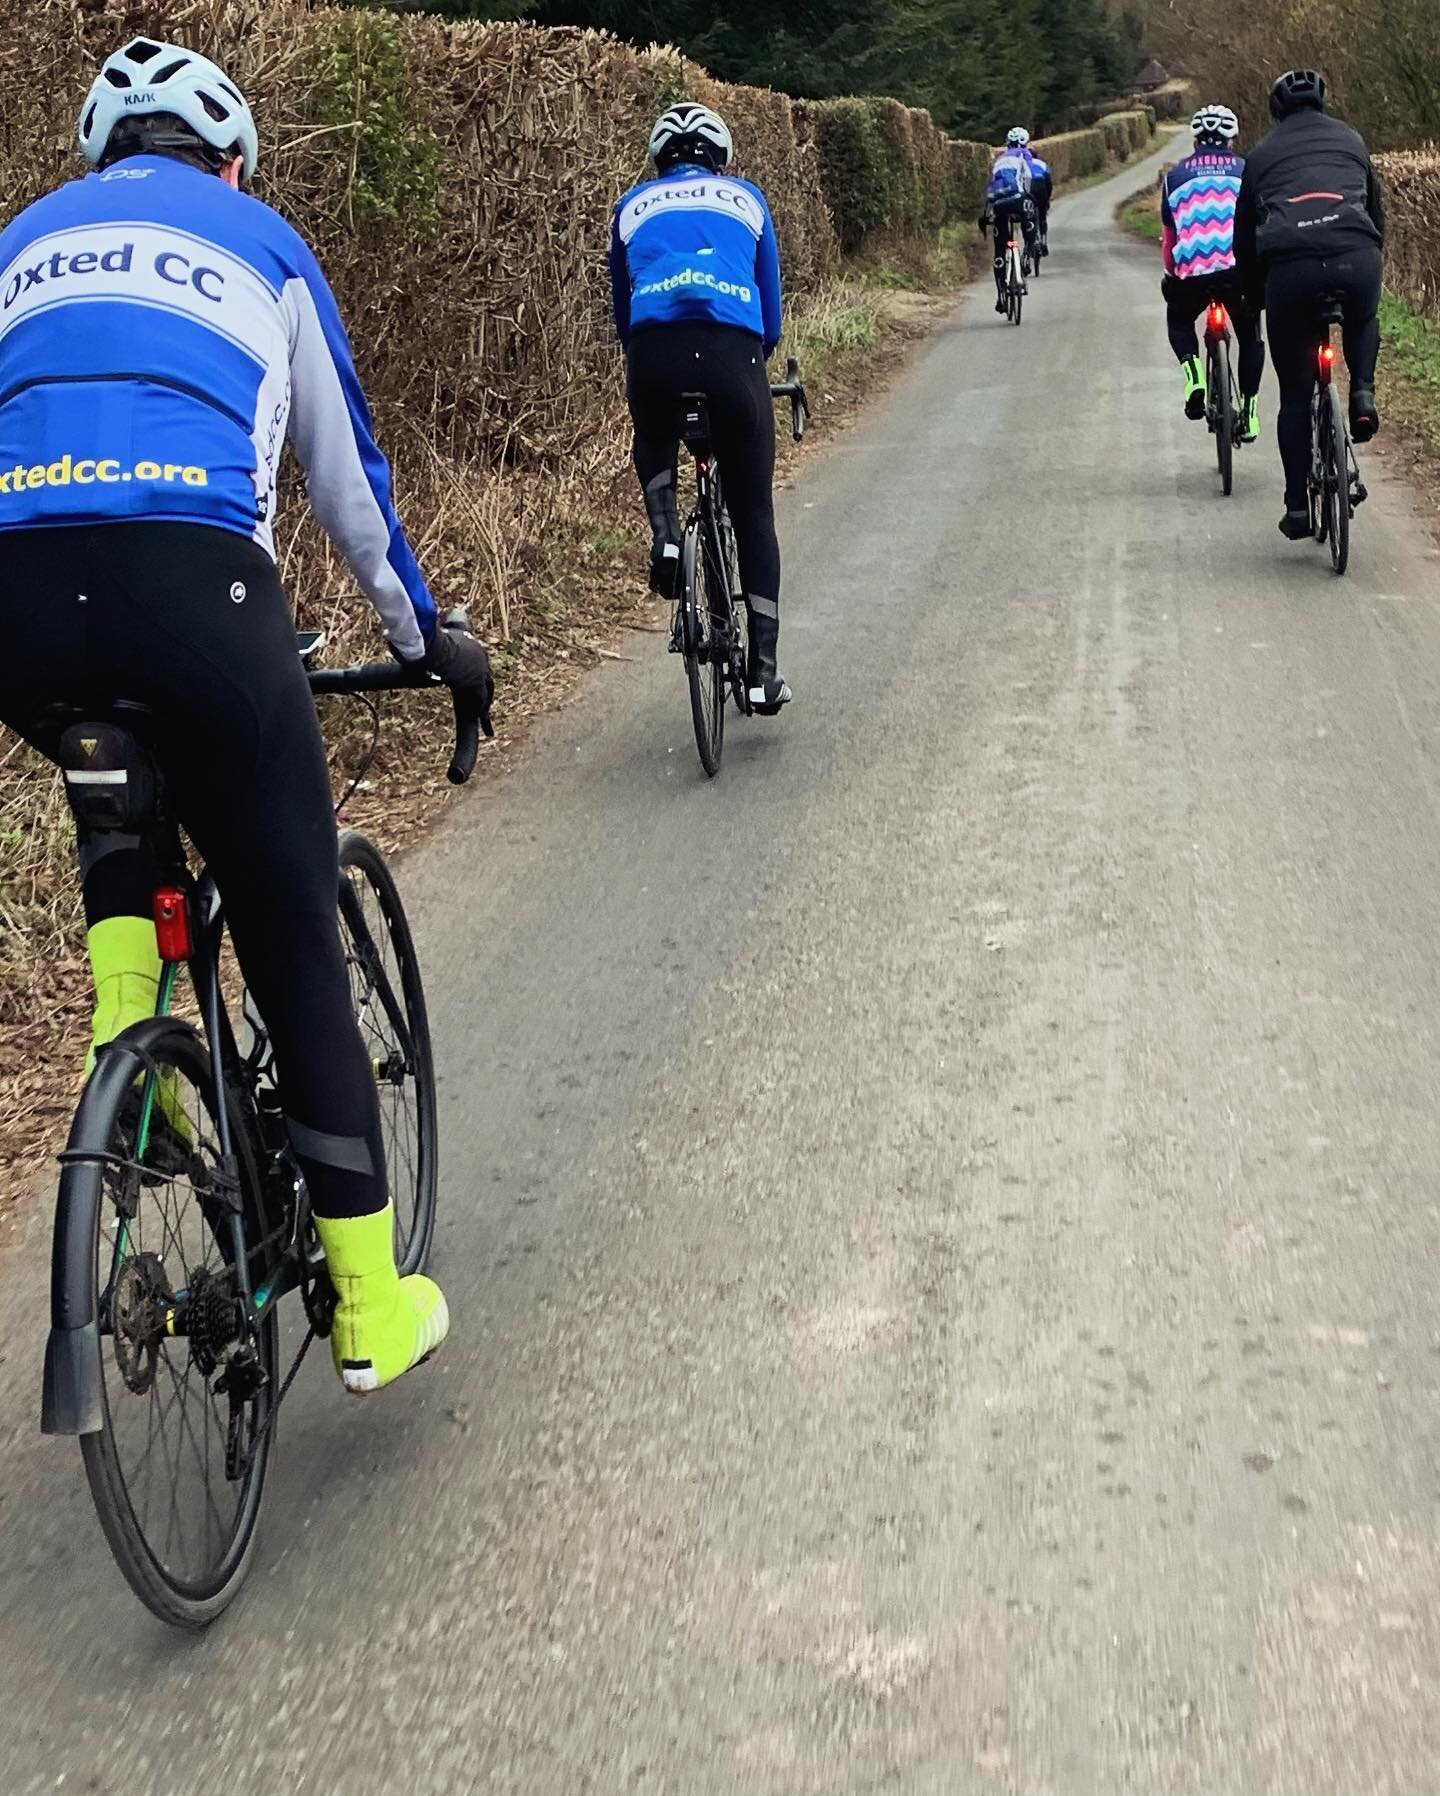 Foxgrove CC merges with Oxted CC on Pilgrims Way one February morning #roadcycling #pilgrimsway #kent #westerham #westerhamhill #rodbike #clubcycling #february #englishcountryside #countrylanes